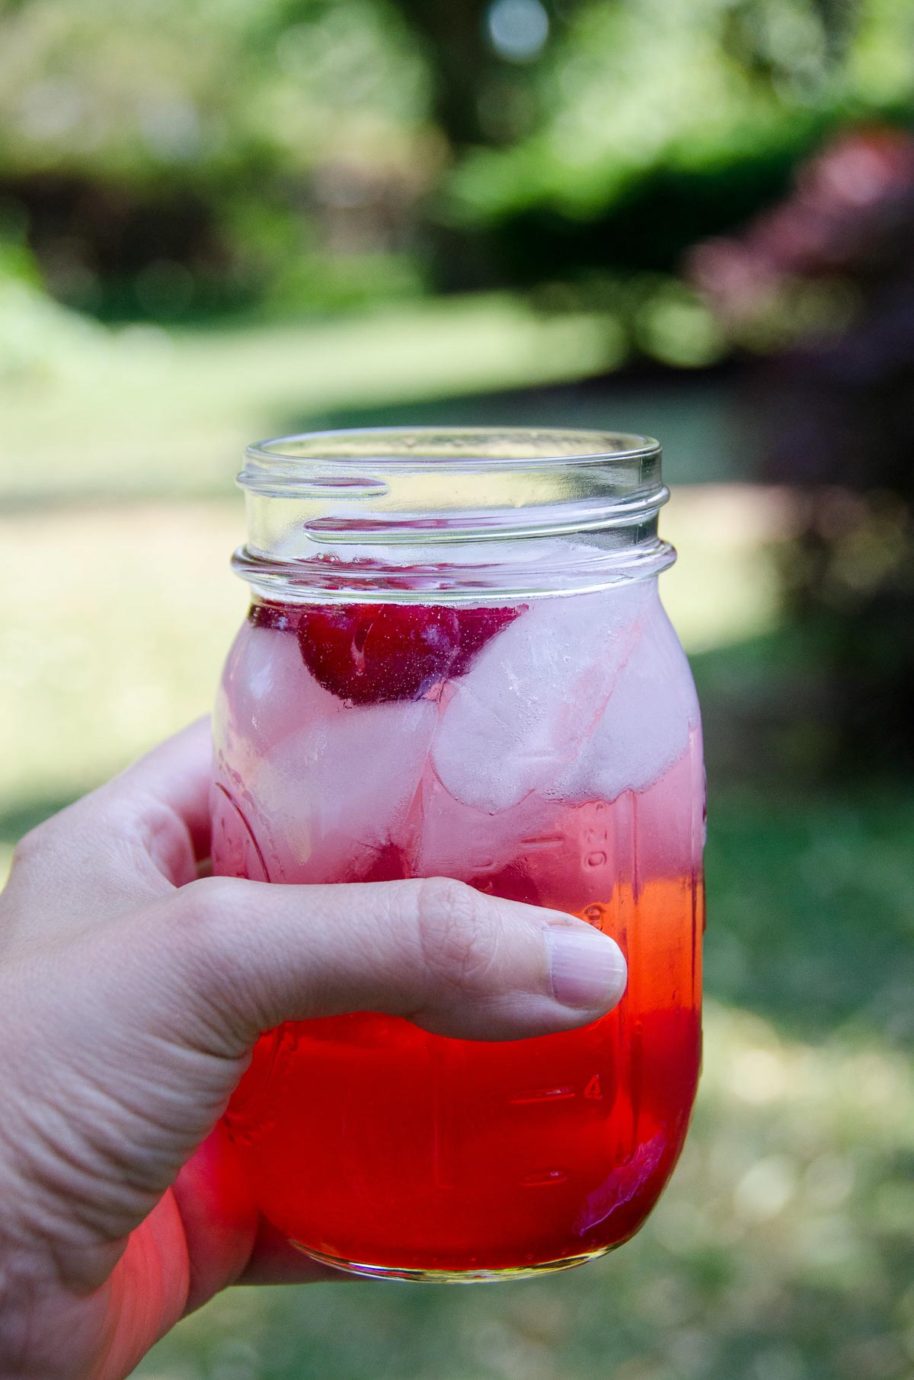 sour cherry shirley temple in someone's hand outdoors